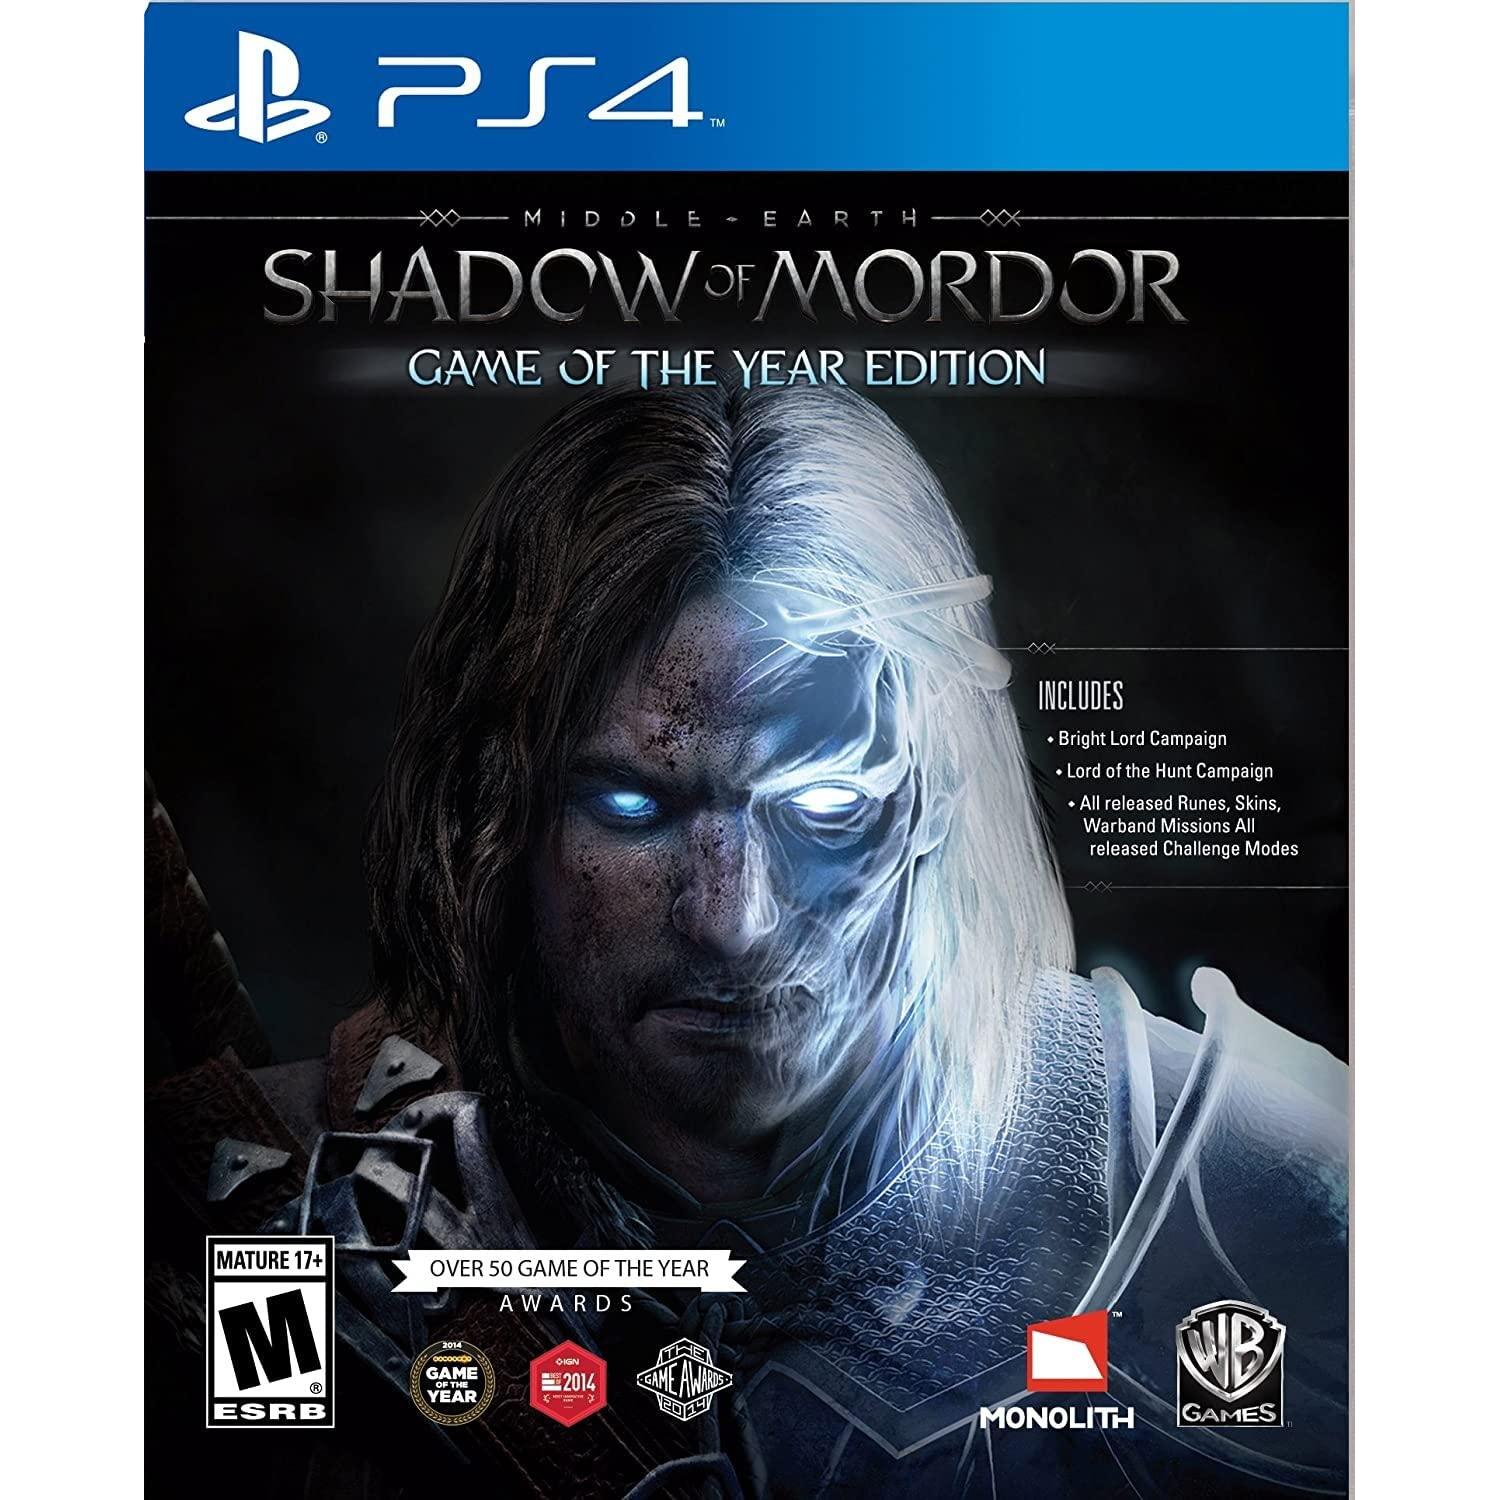 PS4 - Middle Earth Shadow of Mordor Game of the Year Edition